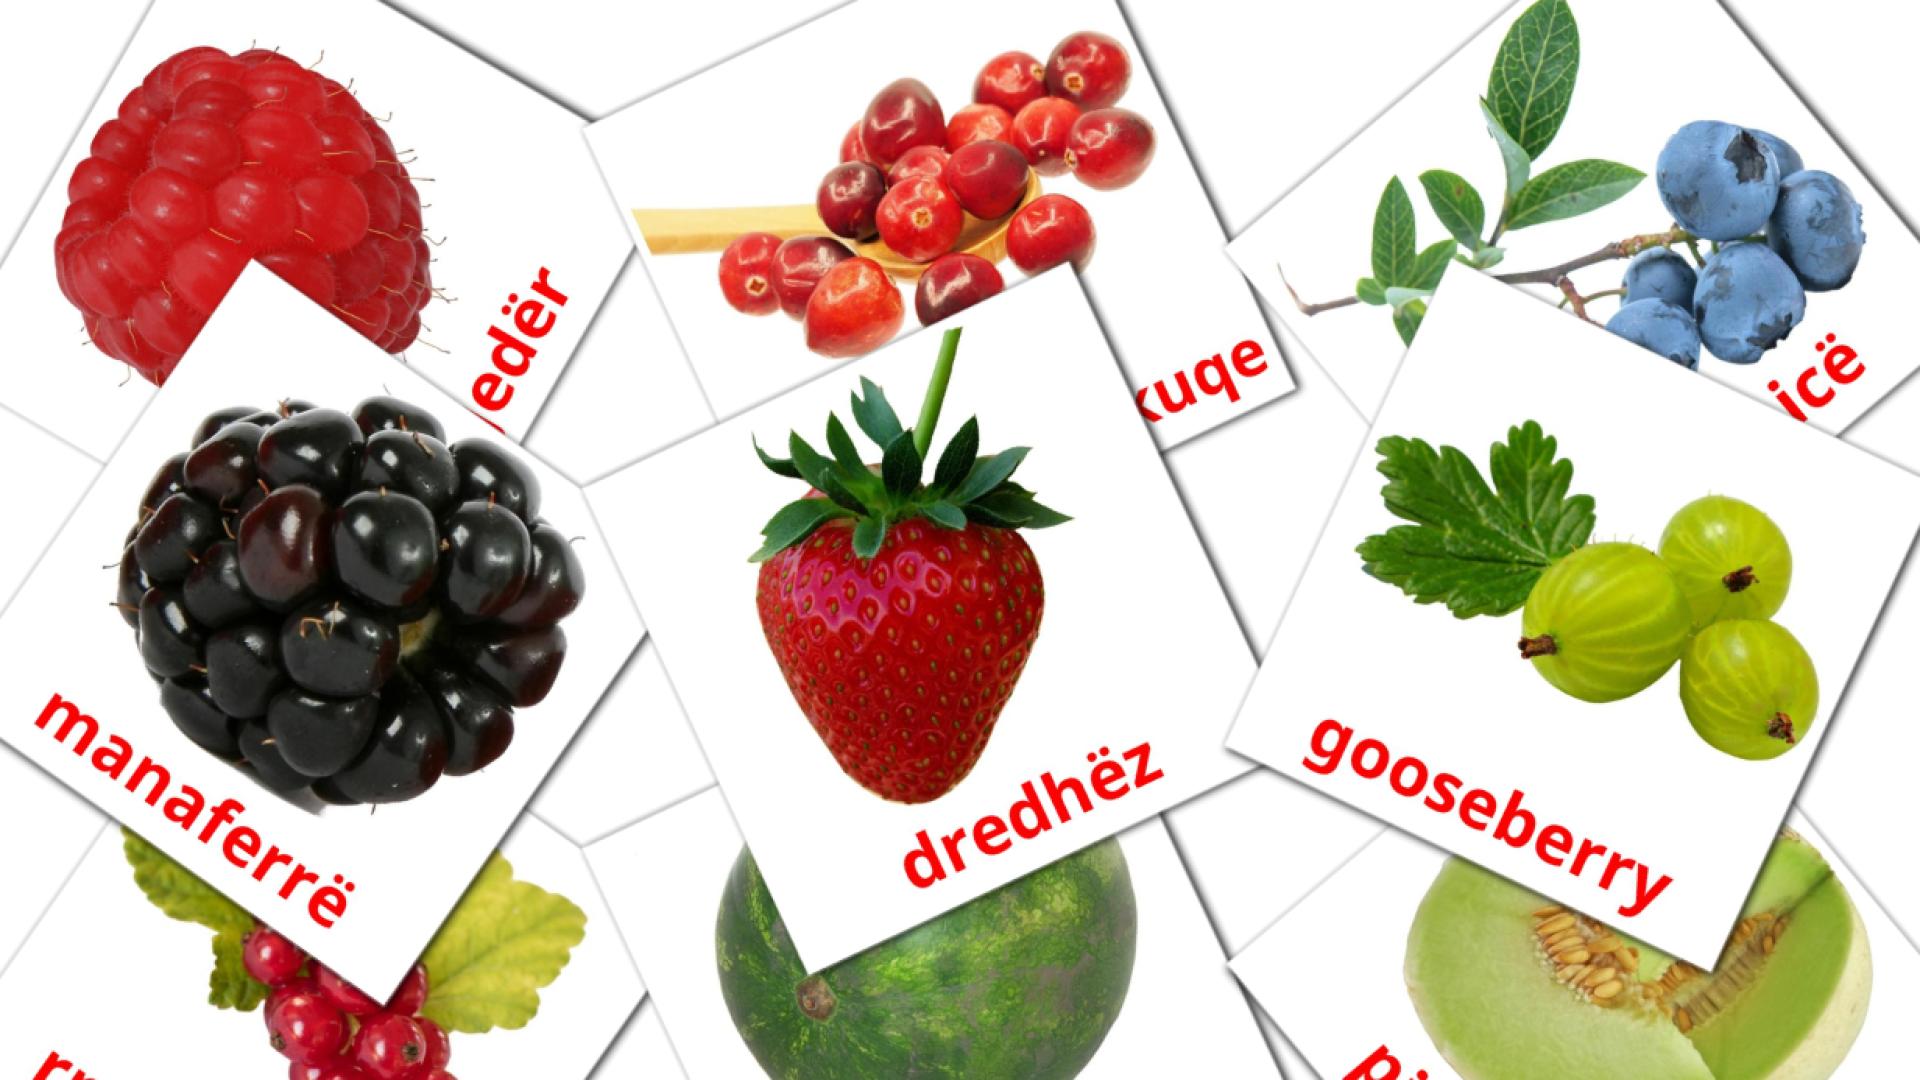 Berries - albanian vocabulary cards